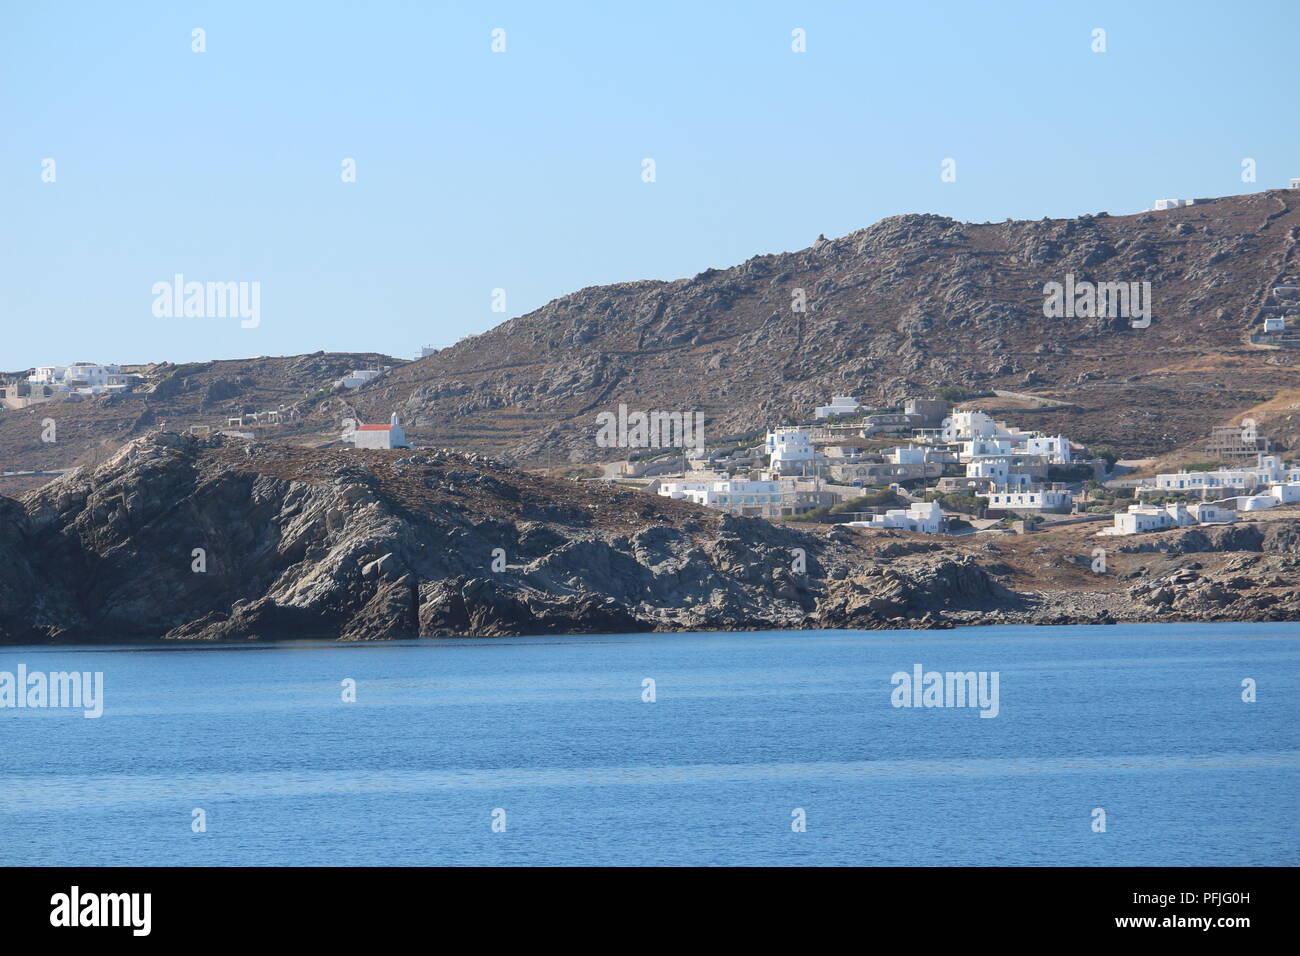 View of the island of Mykonos from a distance showing villages on the hills Stock Photo